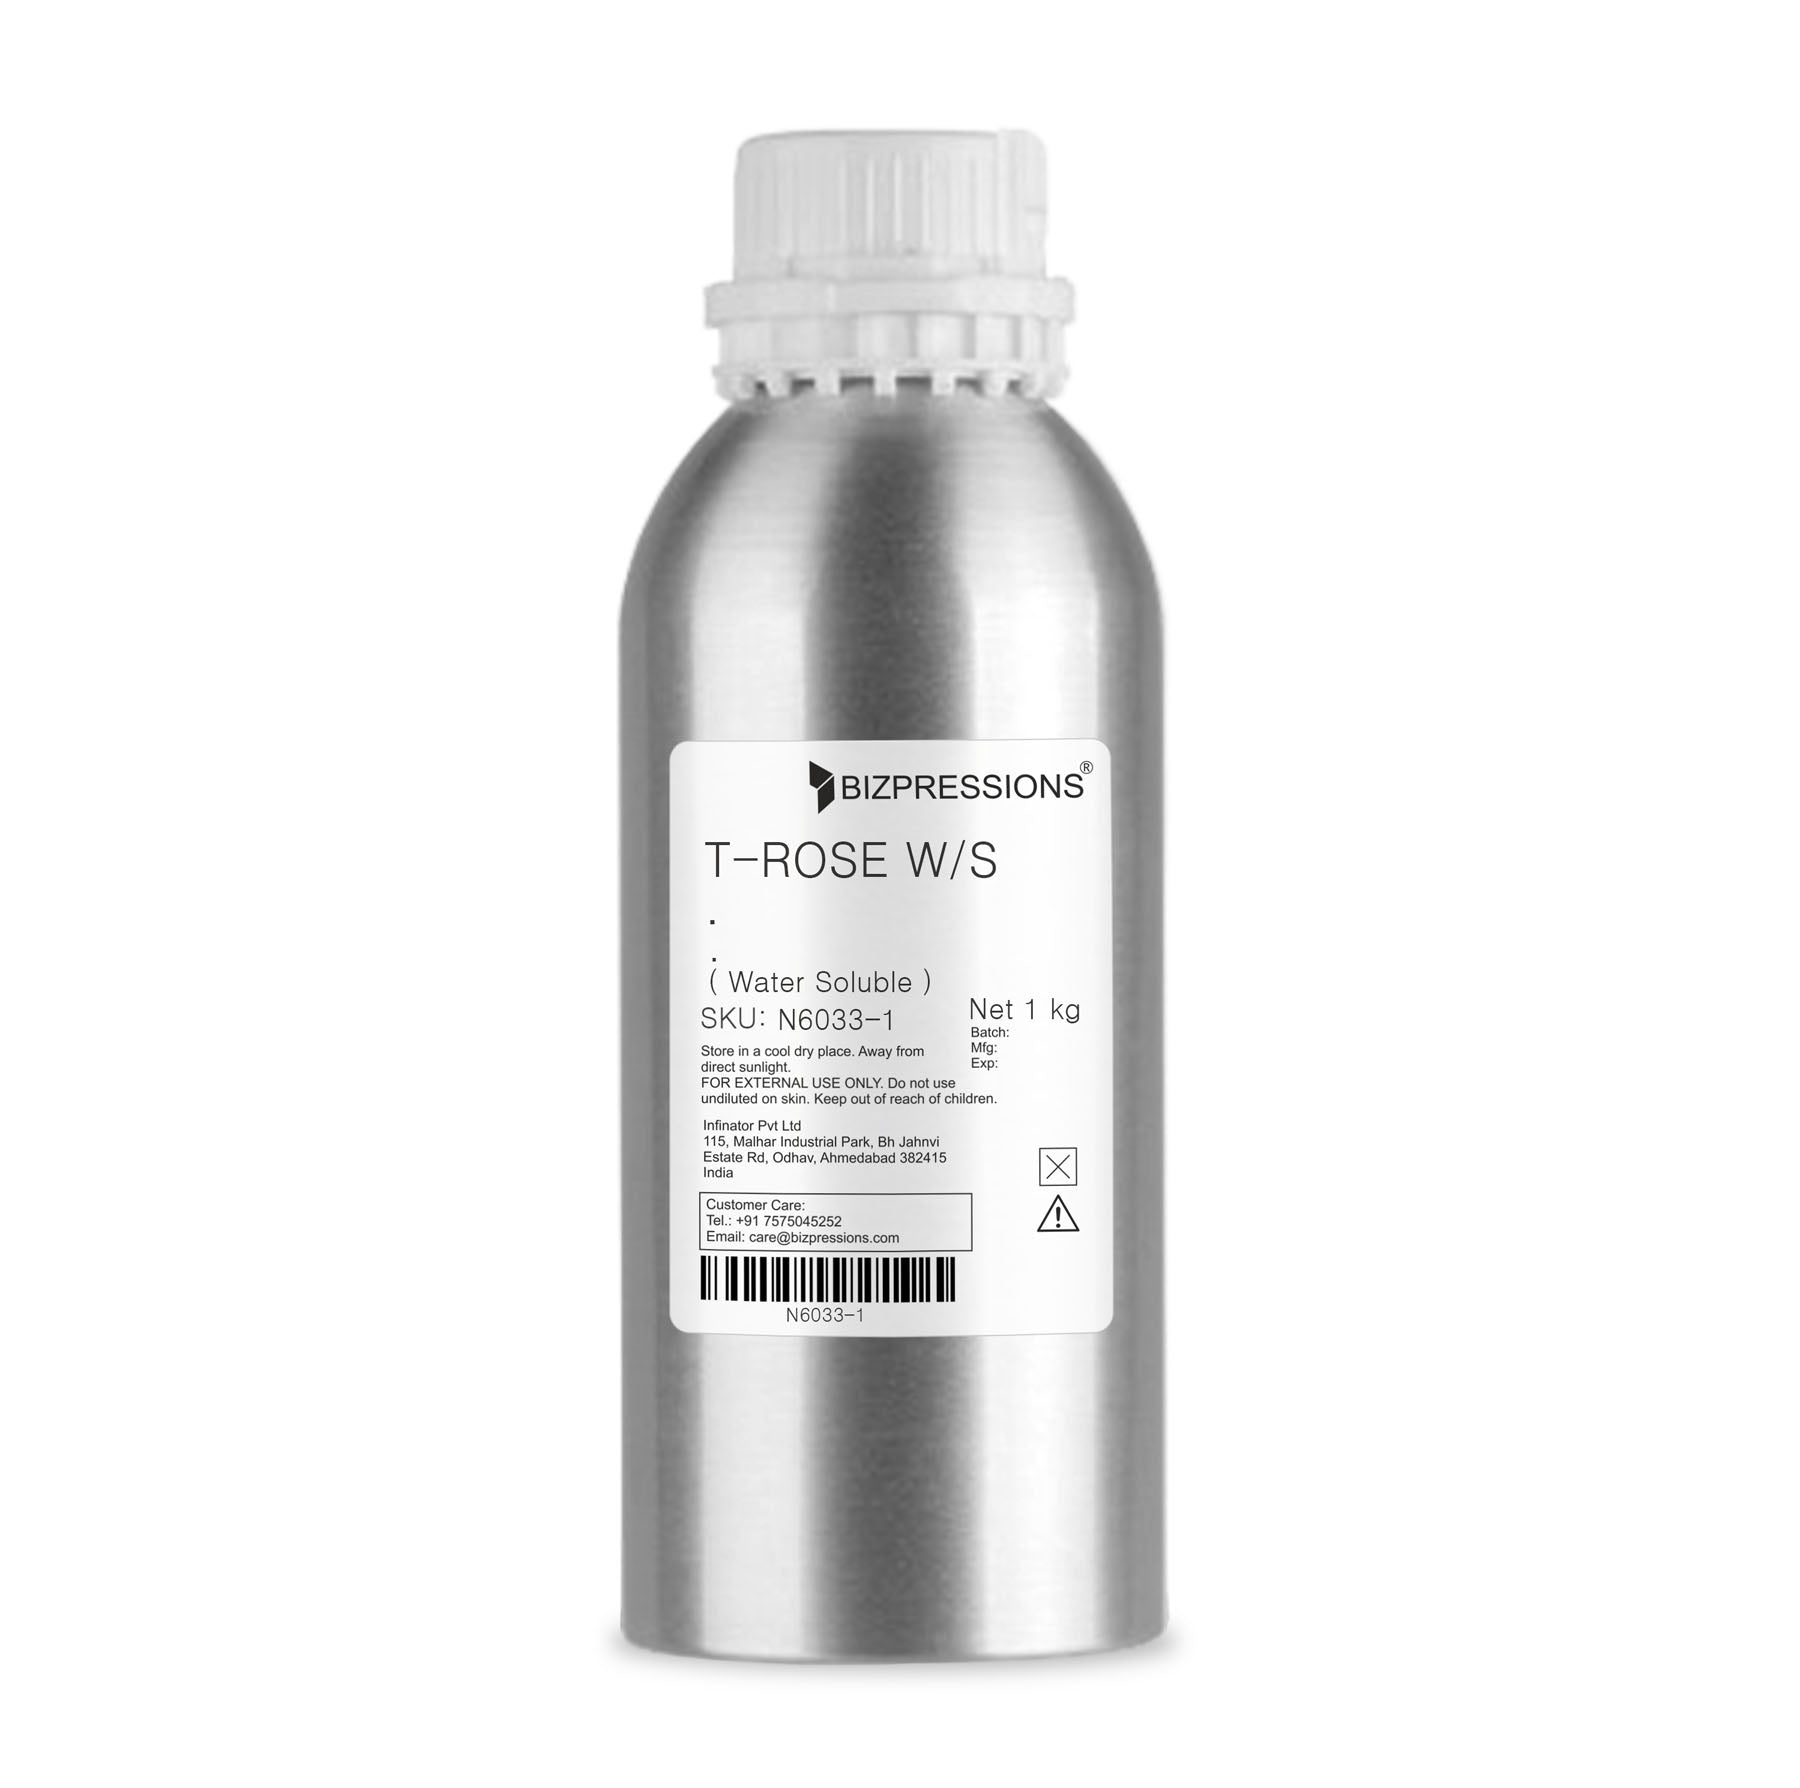 T-ROSE W/S - Fragrance ( Water Soluble ) - 1 kg